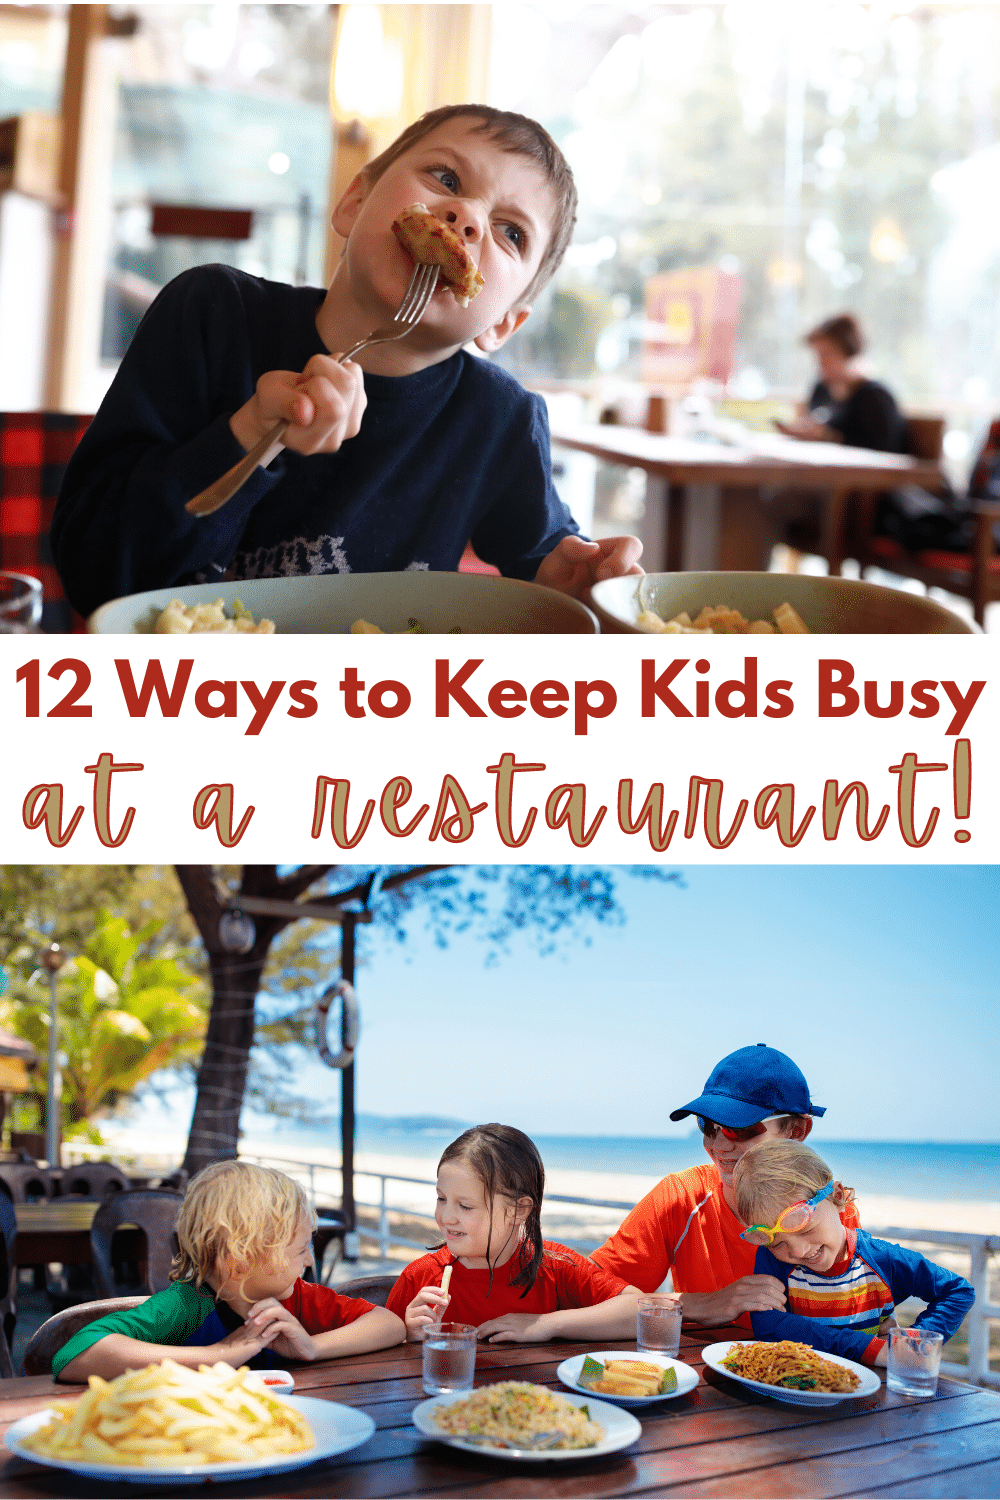 These fun and simple games are easy ways to keep your kids busy at a restaurant so you can enjoy your evening out as a family. #forkids #familydining #kidseatout via @wondermomwannab